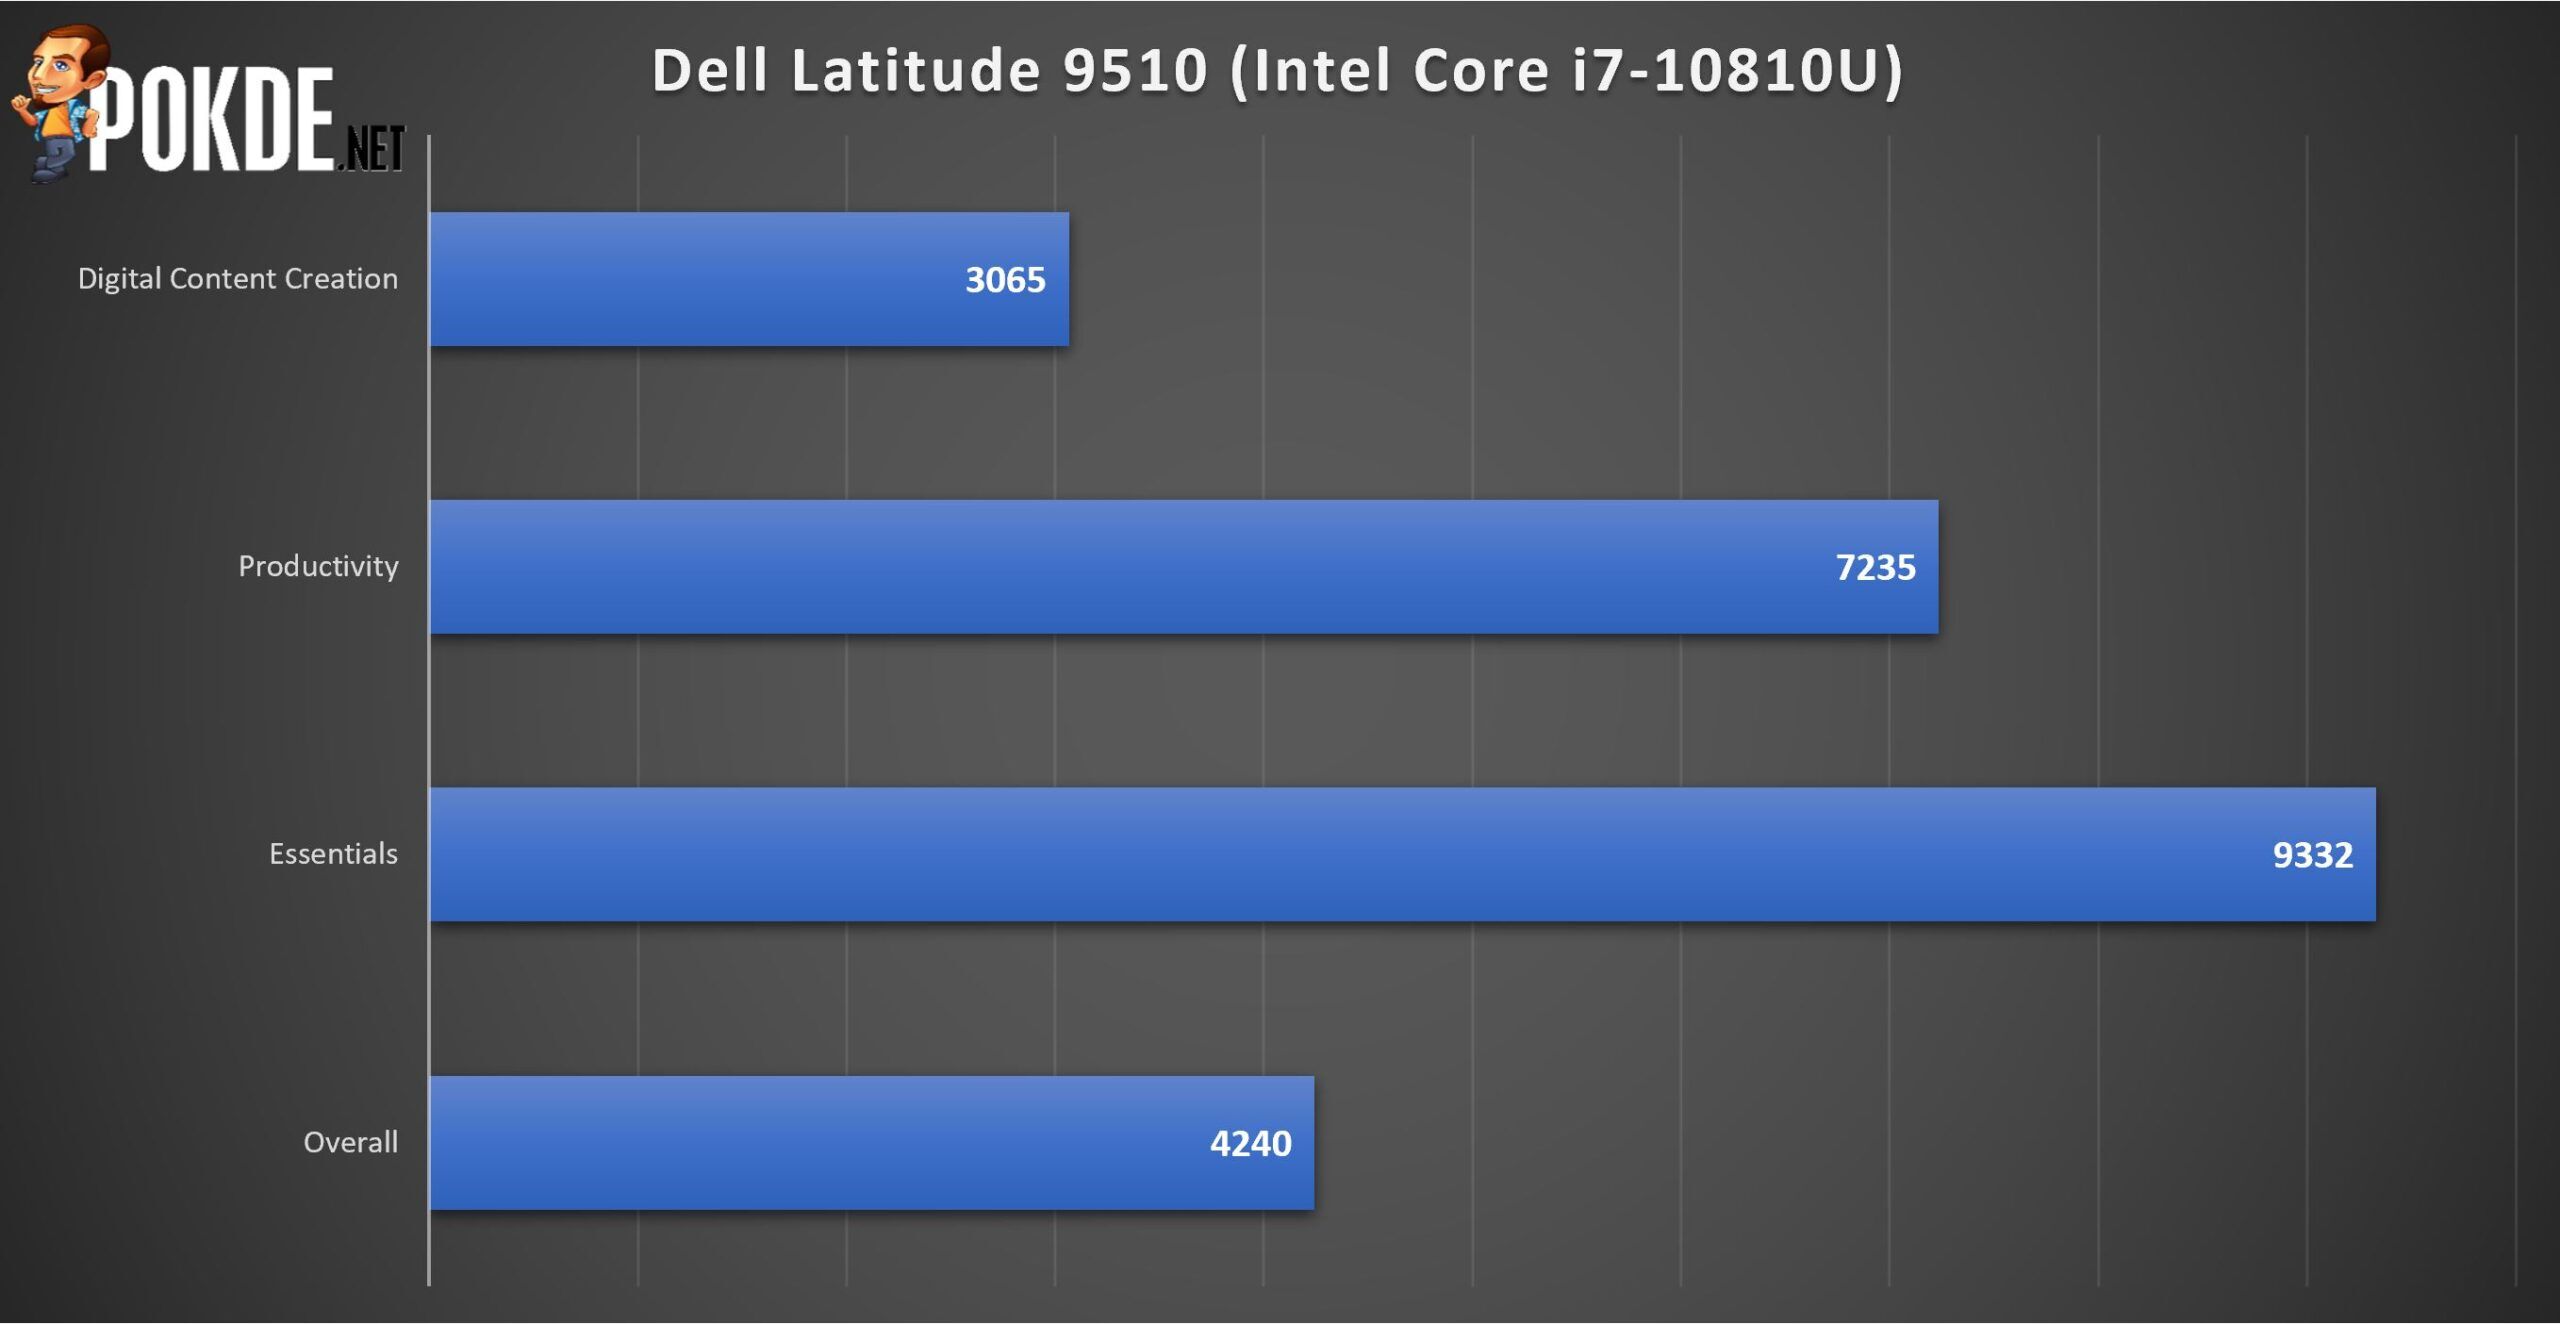 Dell Latitude 9510 2-in-1 Review - When Laptops Truly Mean Business 32